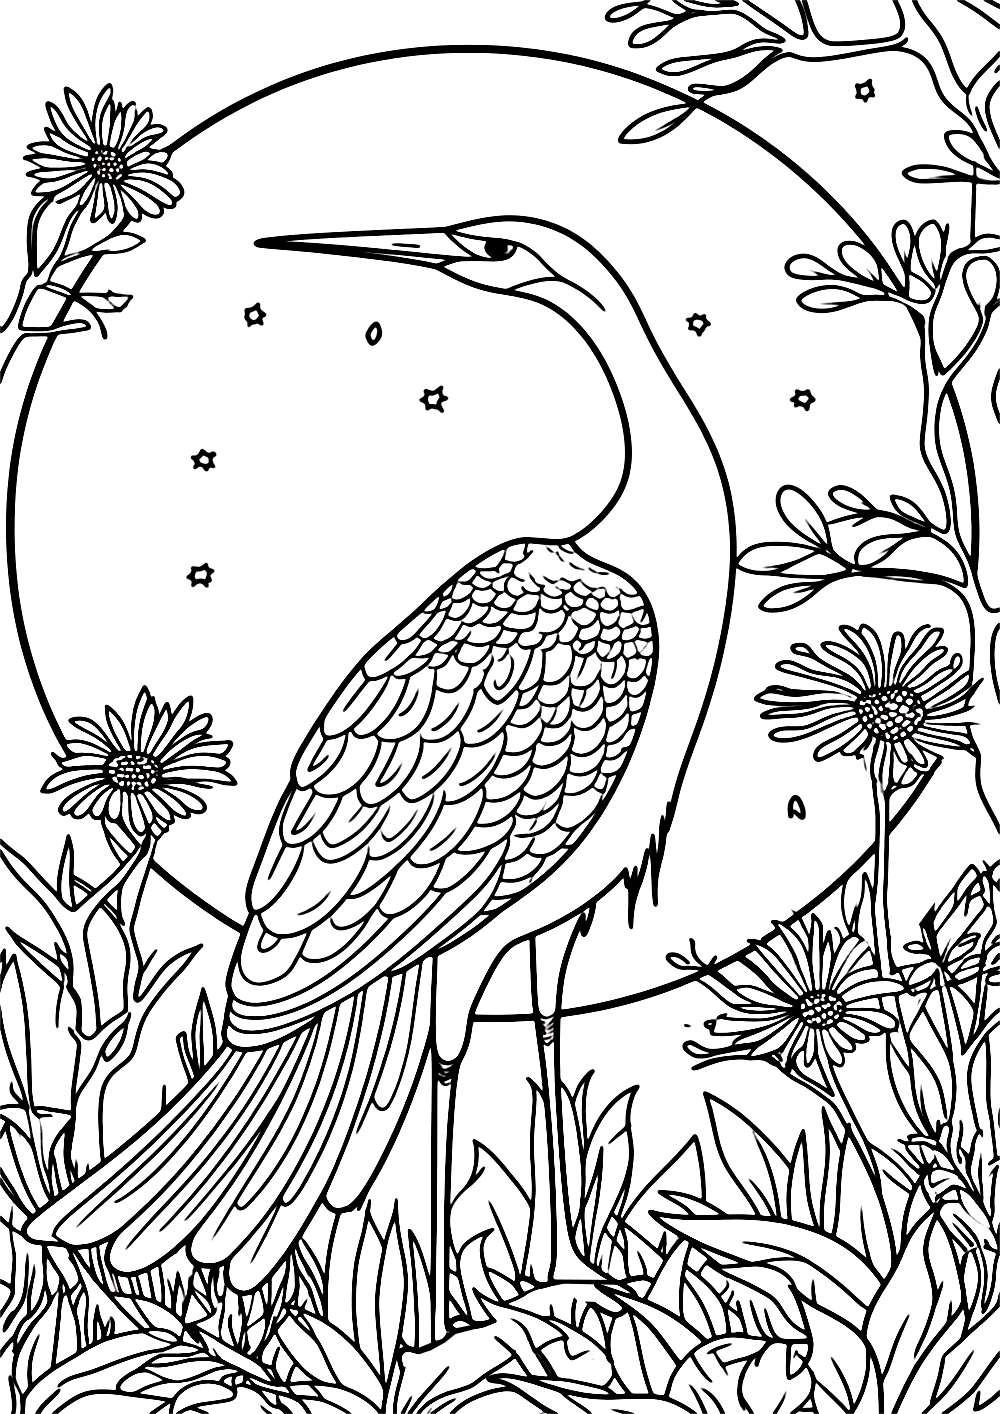 Crane in a Pond Coloring Page - Free Printable Coloring Pages